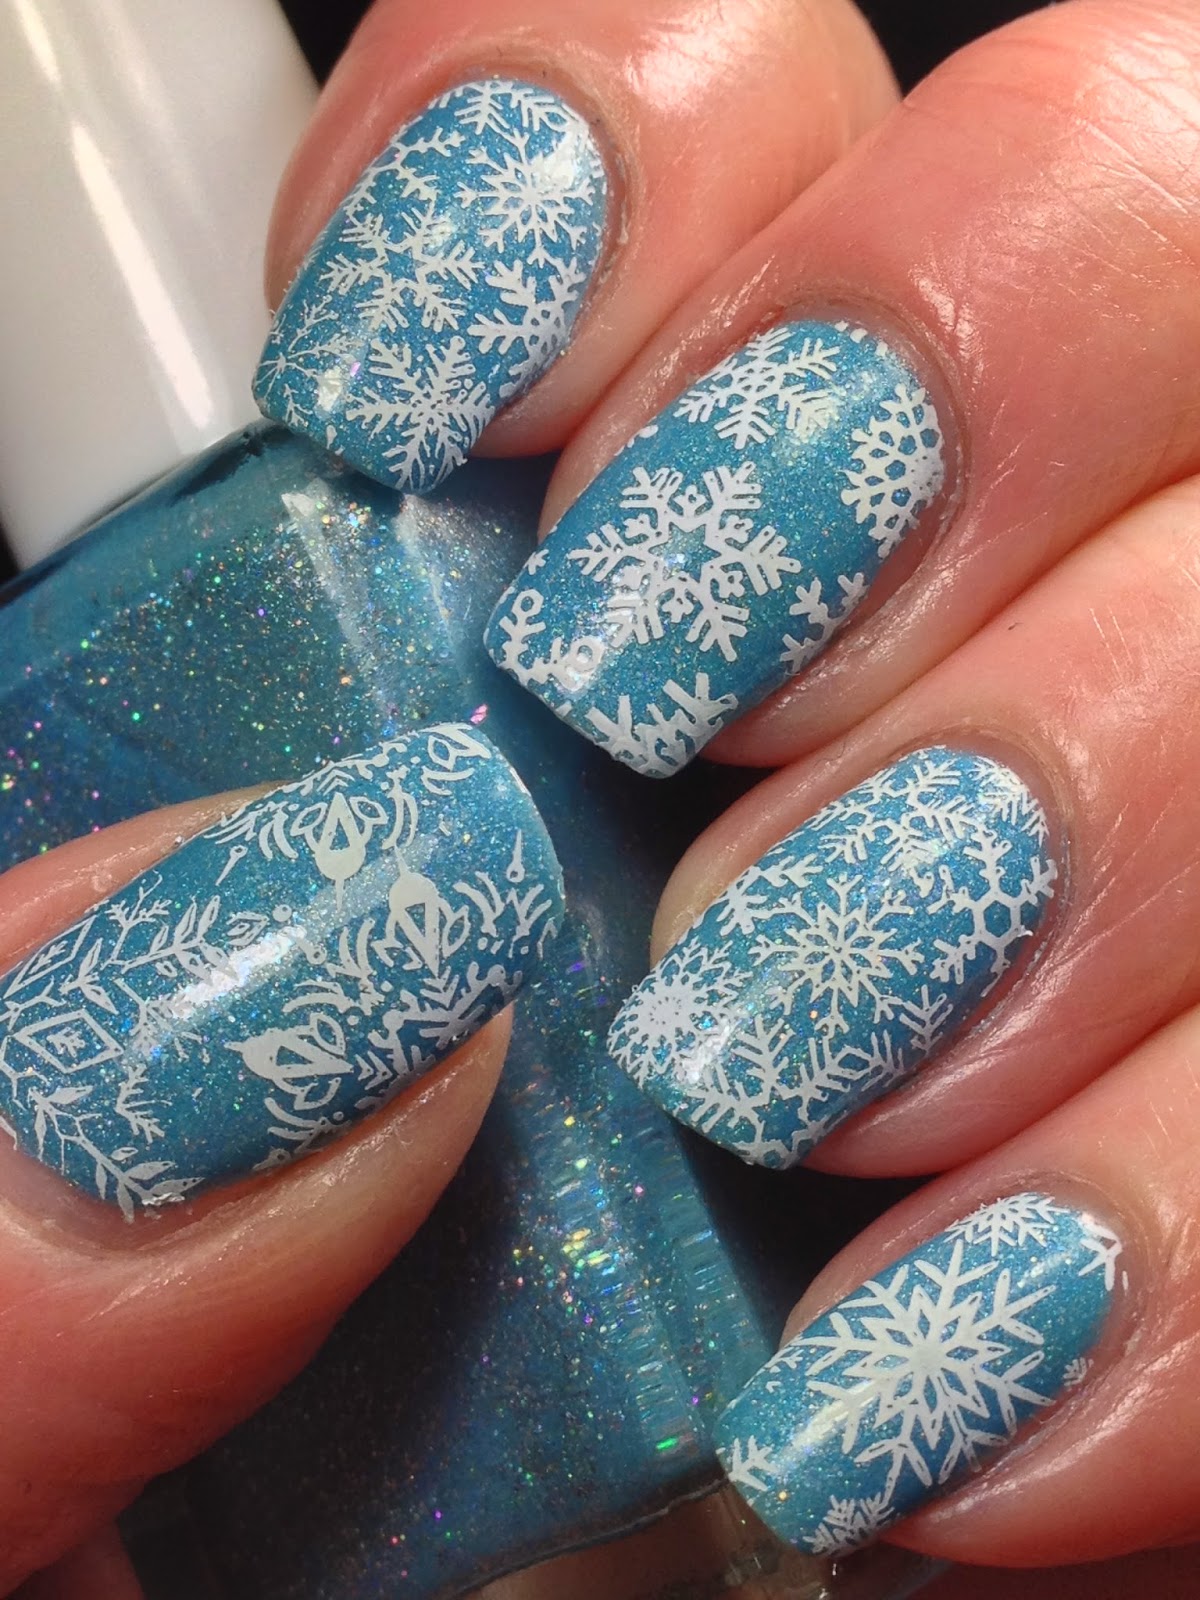 Canadian Nail Fanatic: Glam Polish Break the Ice with Snowflakes